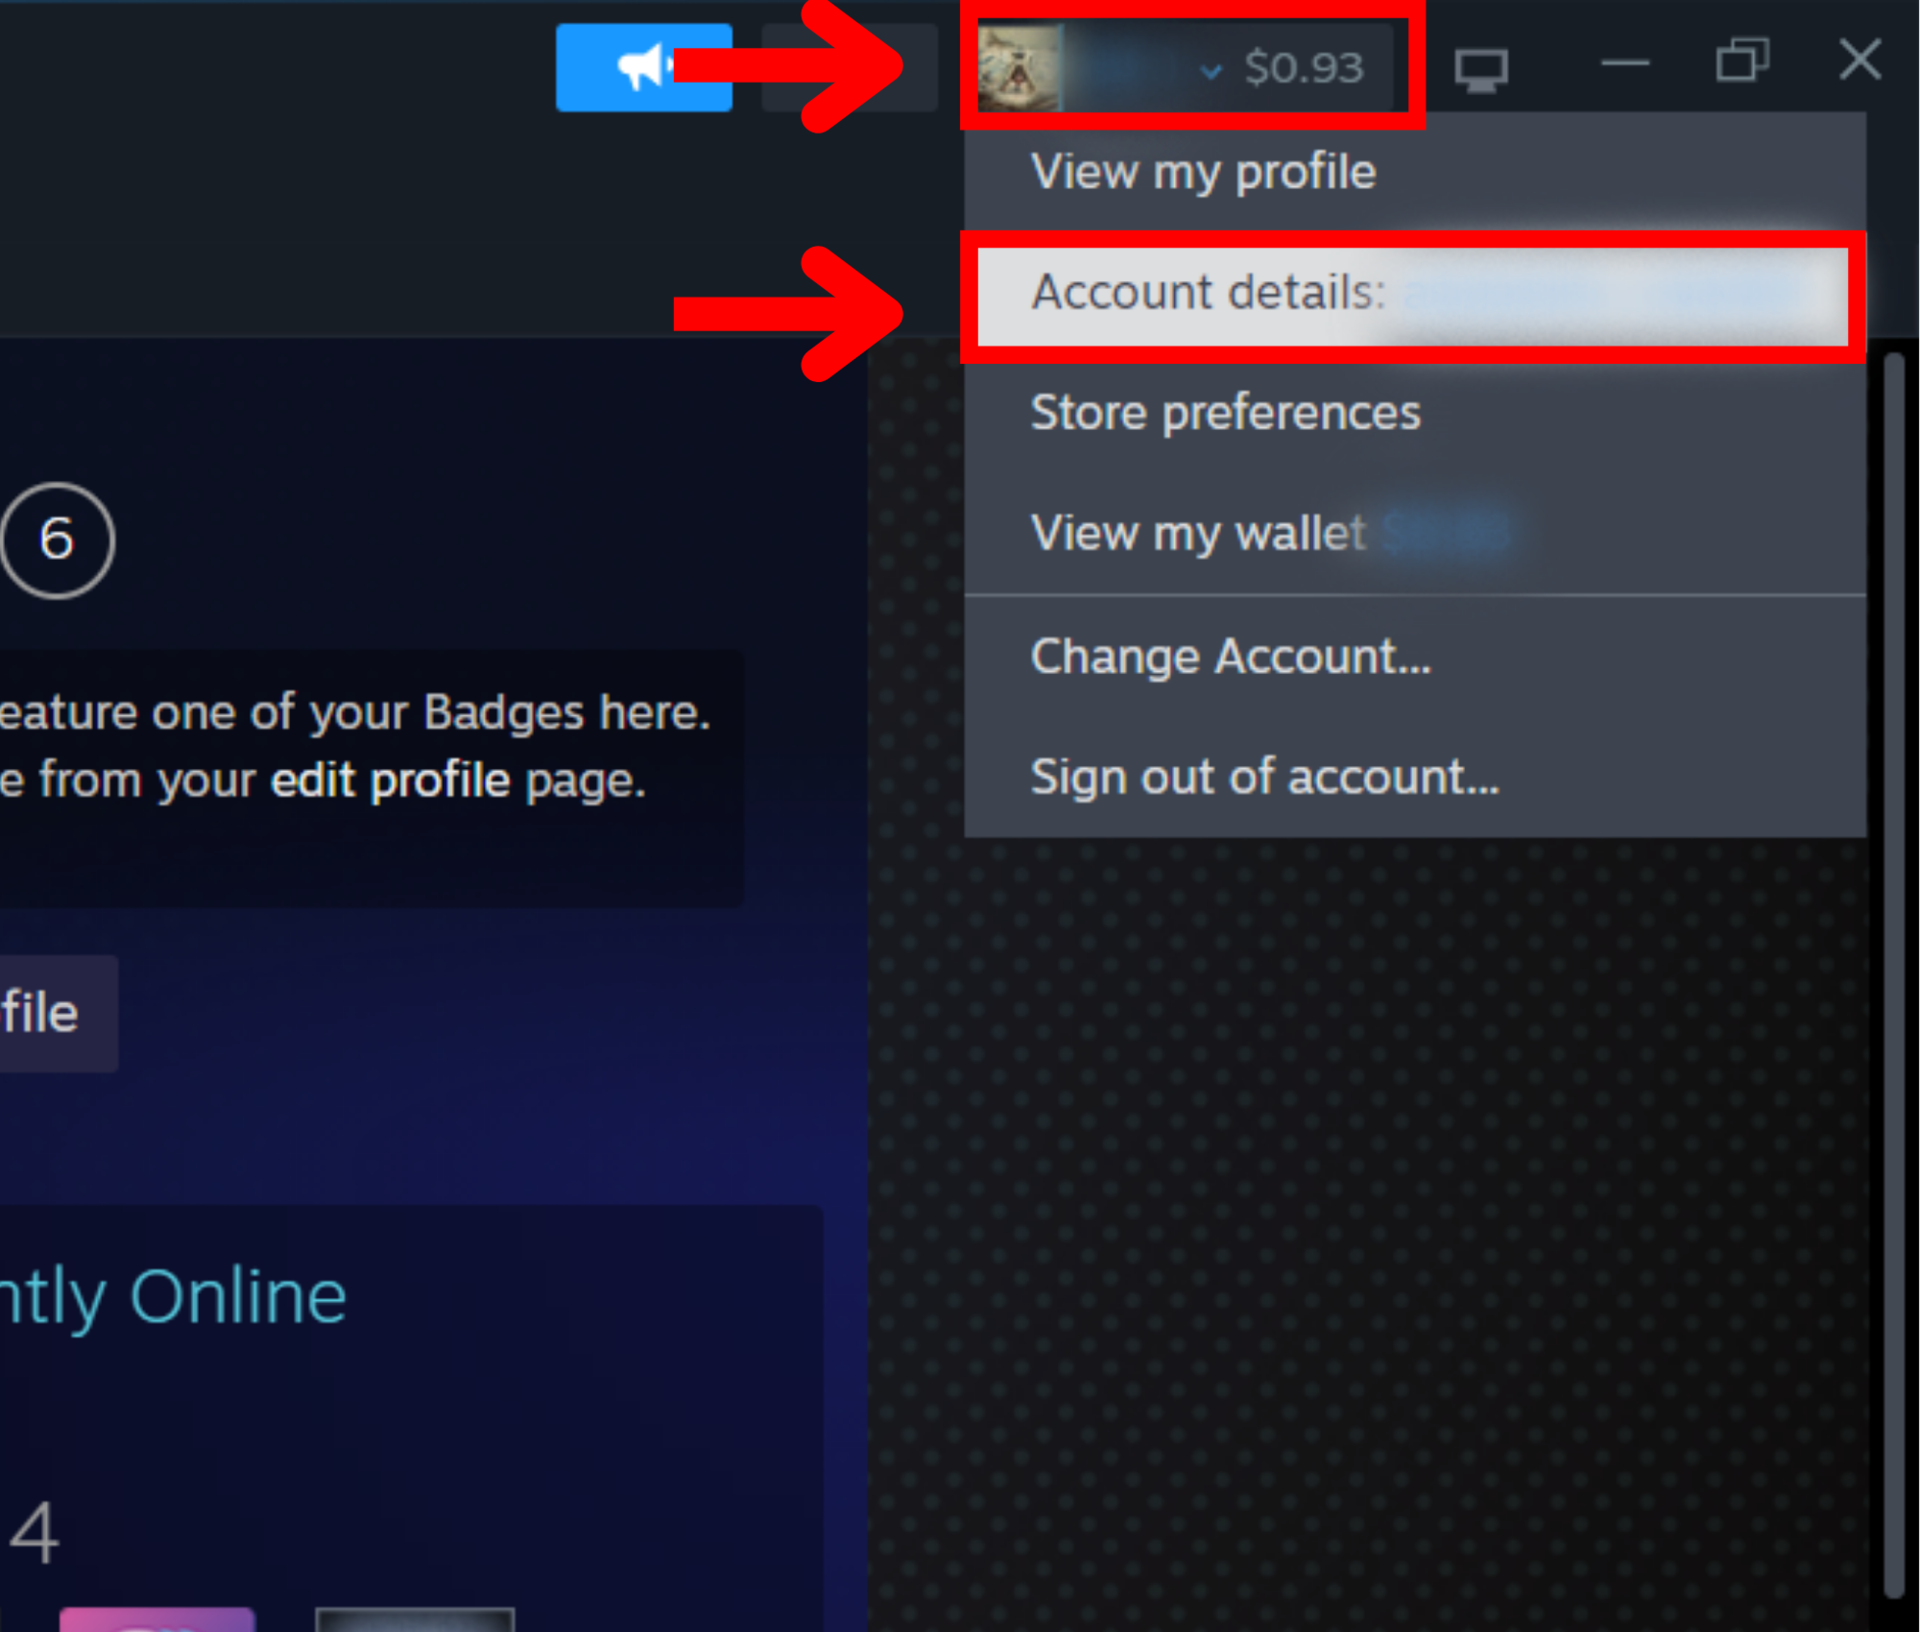 How to Find Your Unique Steam ID on Your Profile